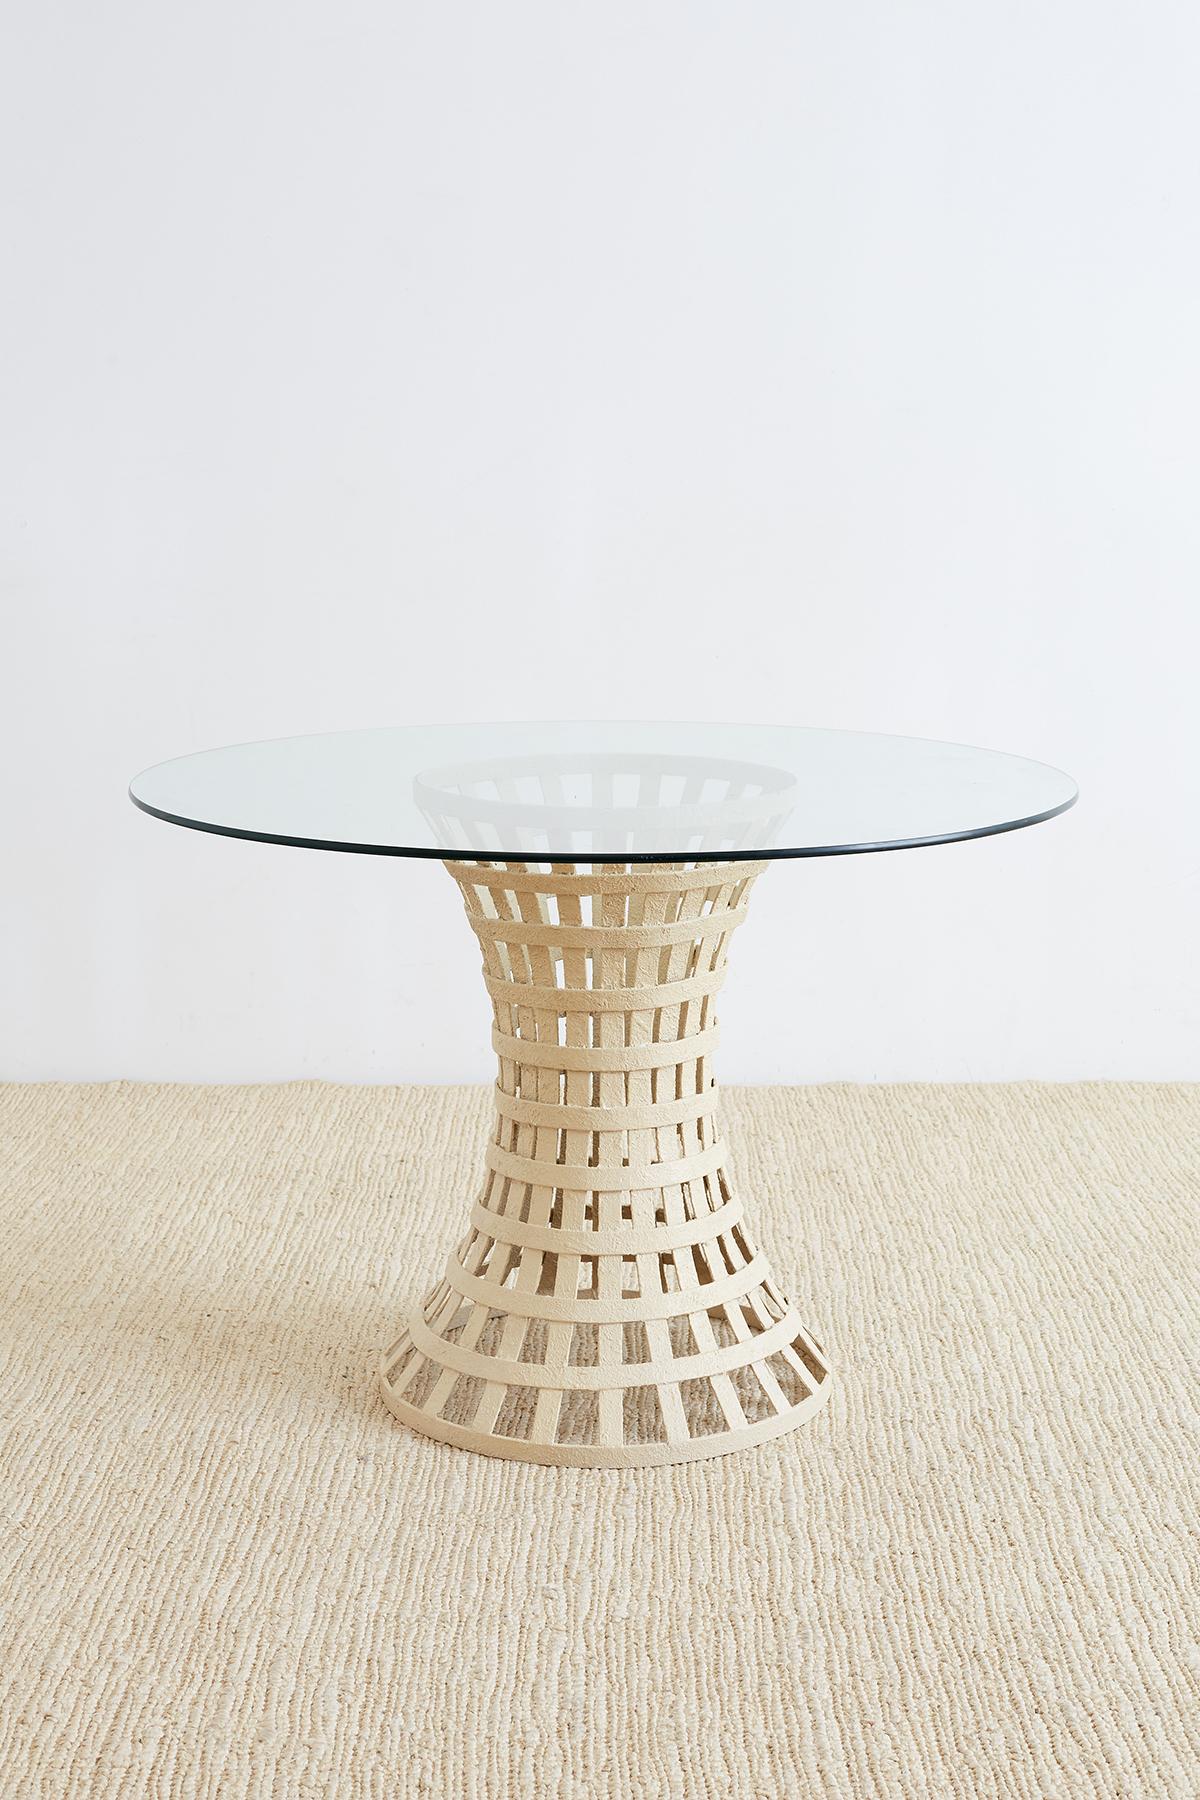 Unique Mid-Century Modern woven metal basket style breakfast or dining table. Features a painted metal base constructed from metal rings and slats in a waisted form topped with a pane of round glass. The base is heavy and solid finished with a thick